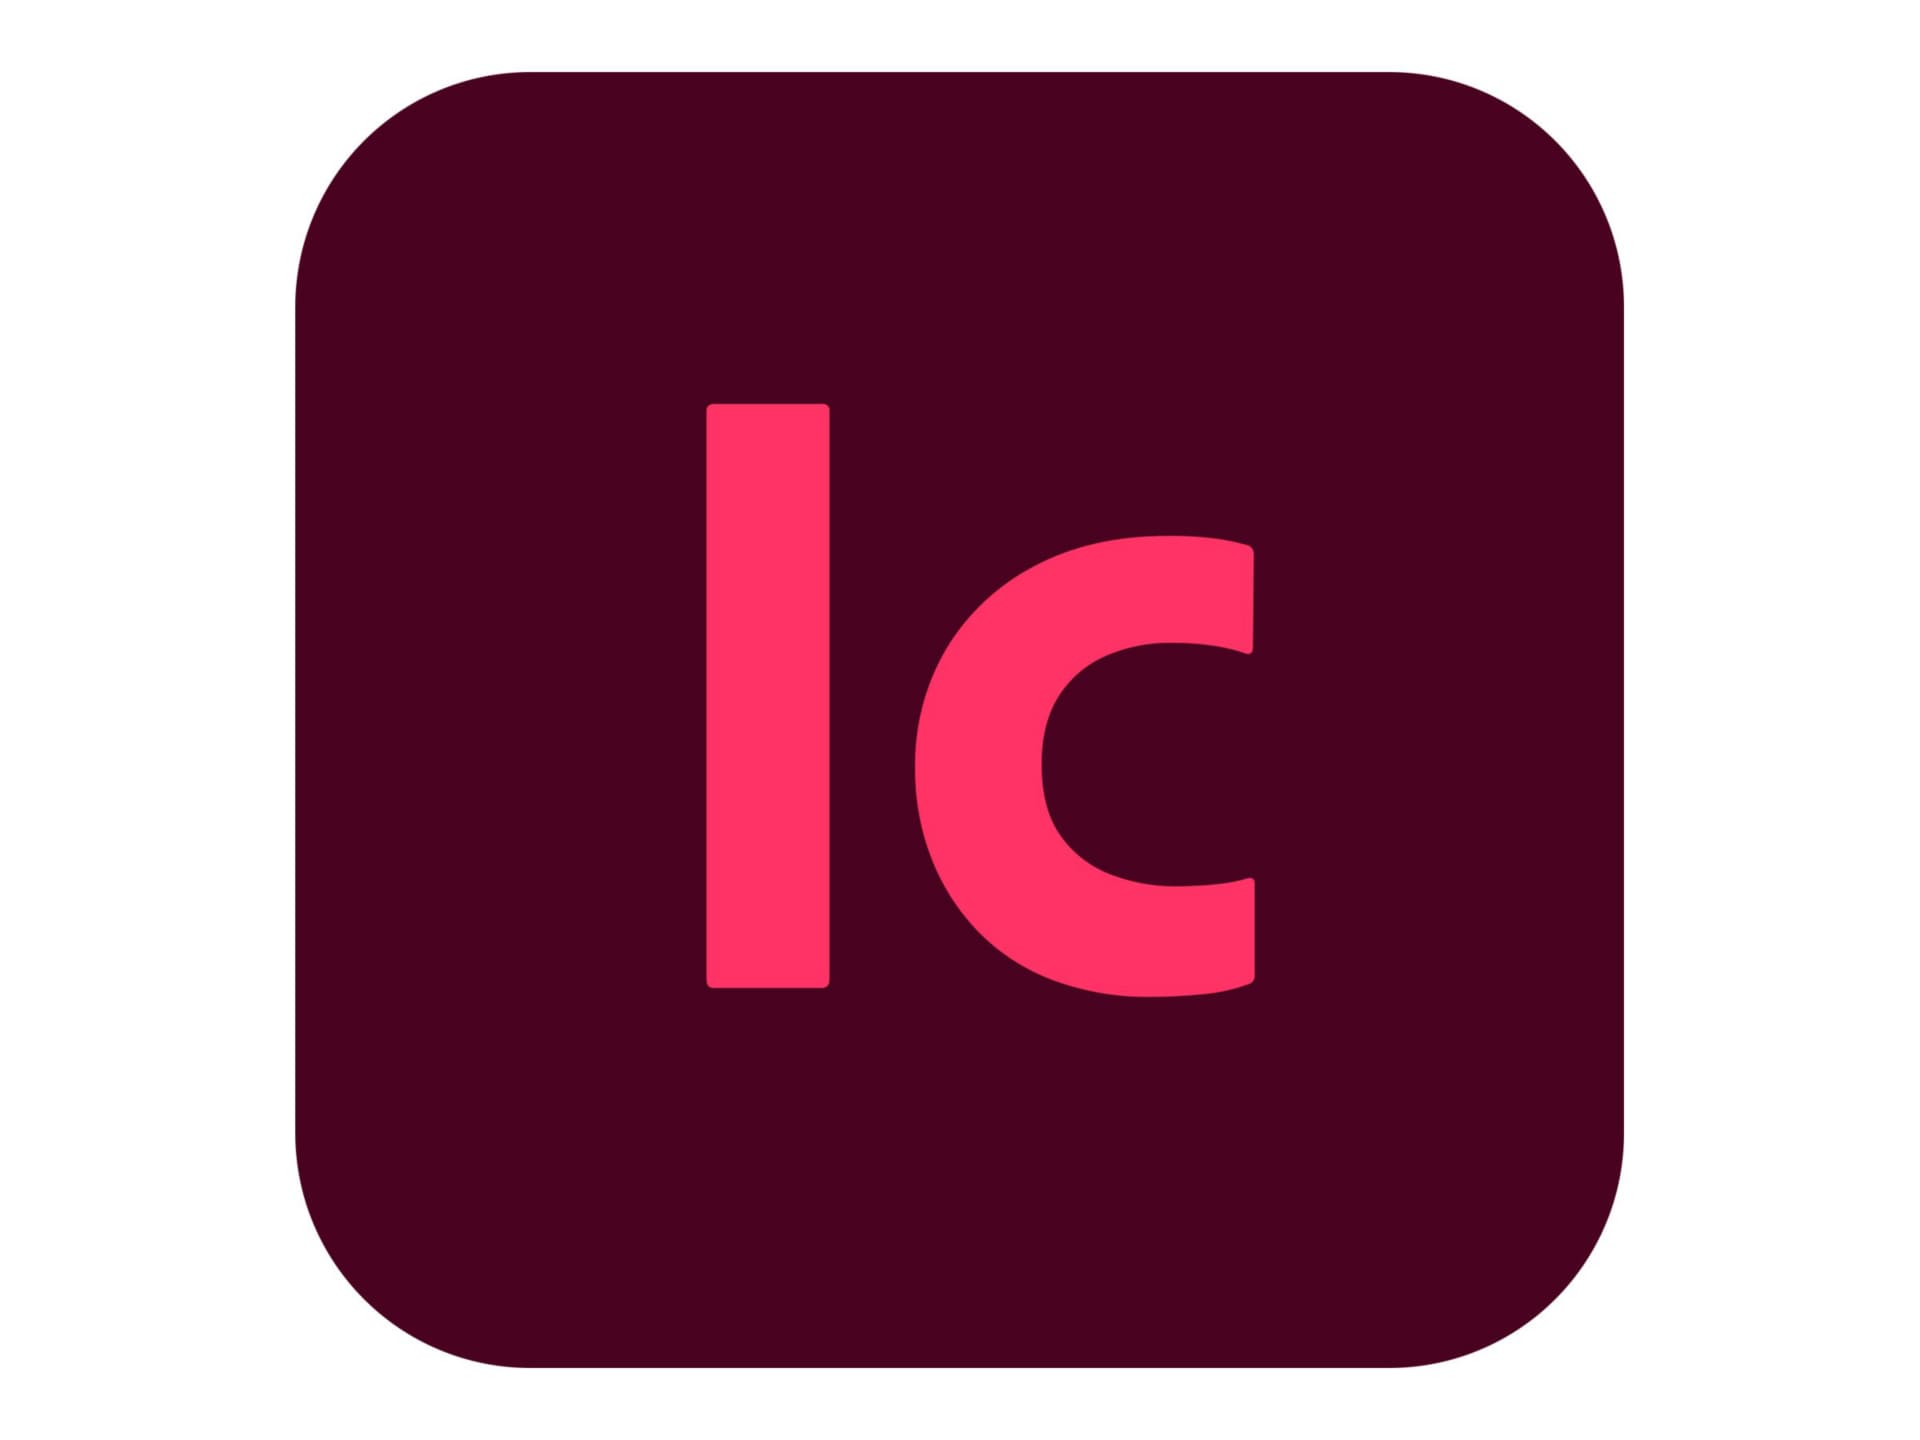 Adobe InCopy CC - Subscription New (17 months) - 1 user